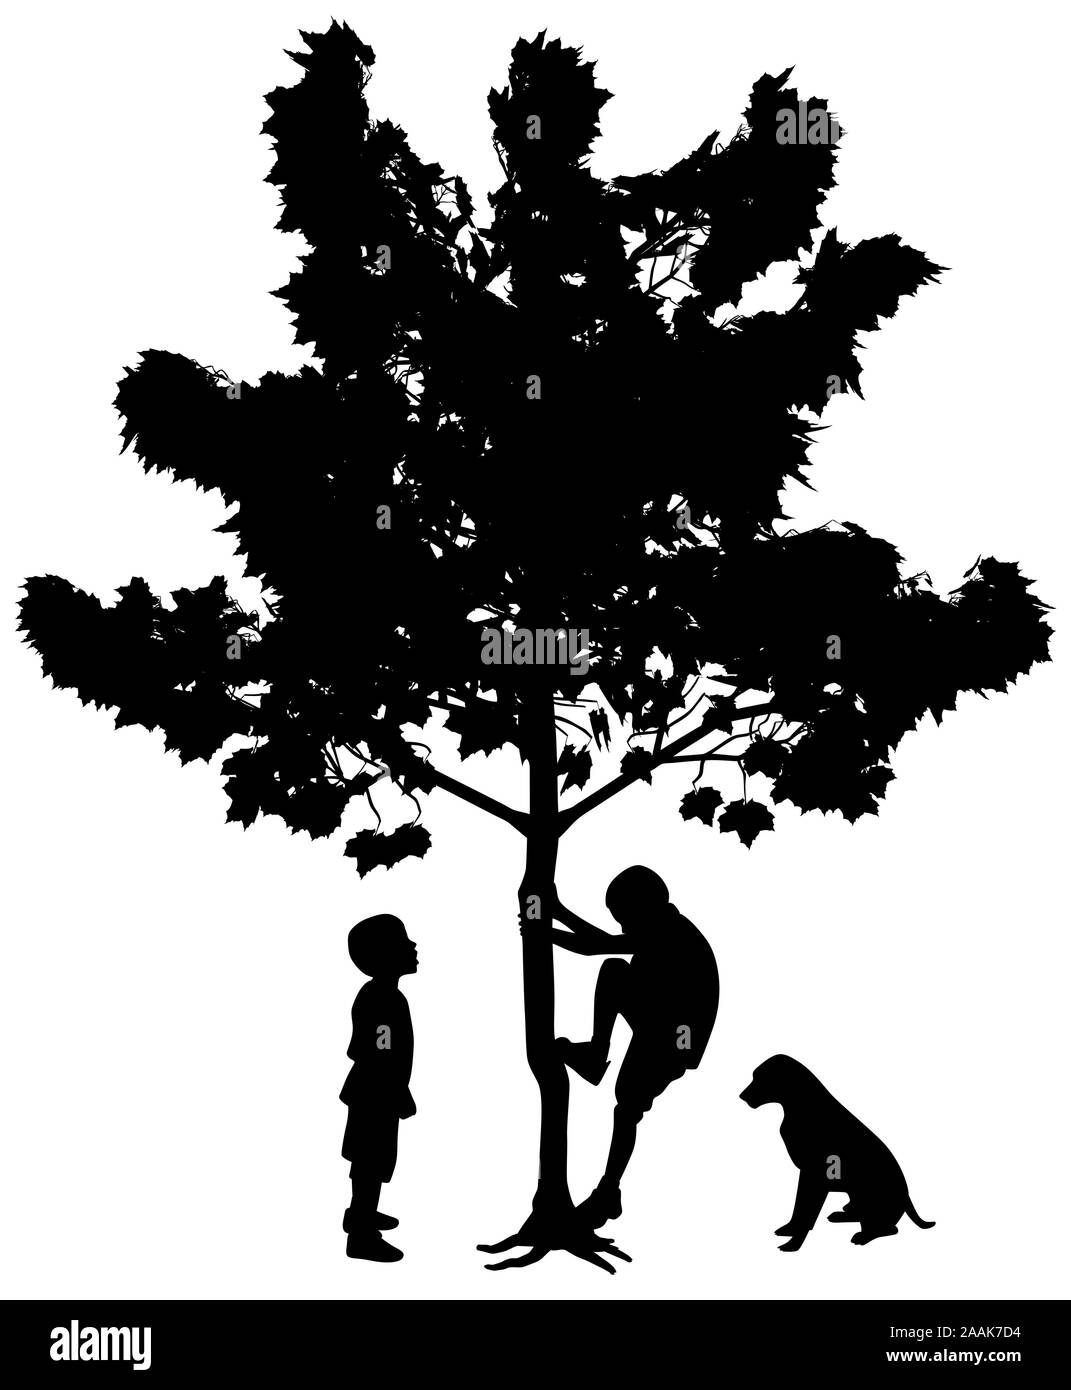 Two best friends little boys with dog. One boy climbing up a tree while another standing and looking with wow face expression at his friend climber. Stock Vector